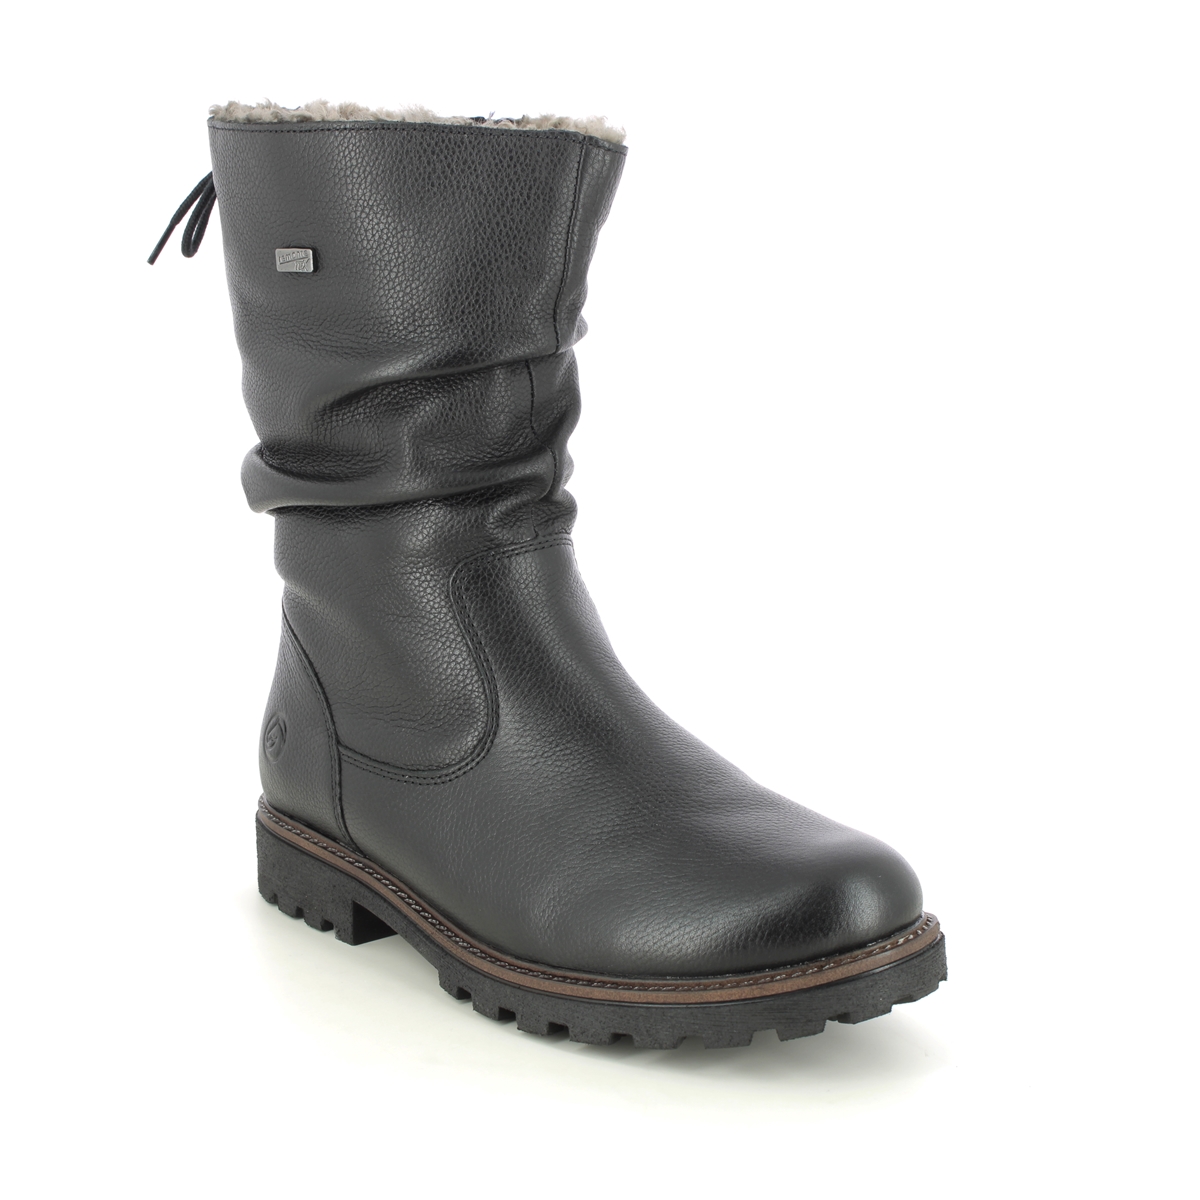 Remonte D8477-01 Brand Tex Sheep Black leather Womens Mid Calf Boots in a Plain Leather in Size 42